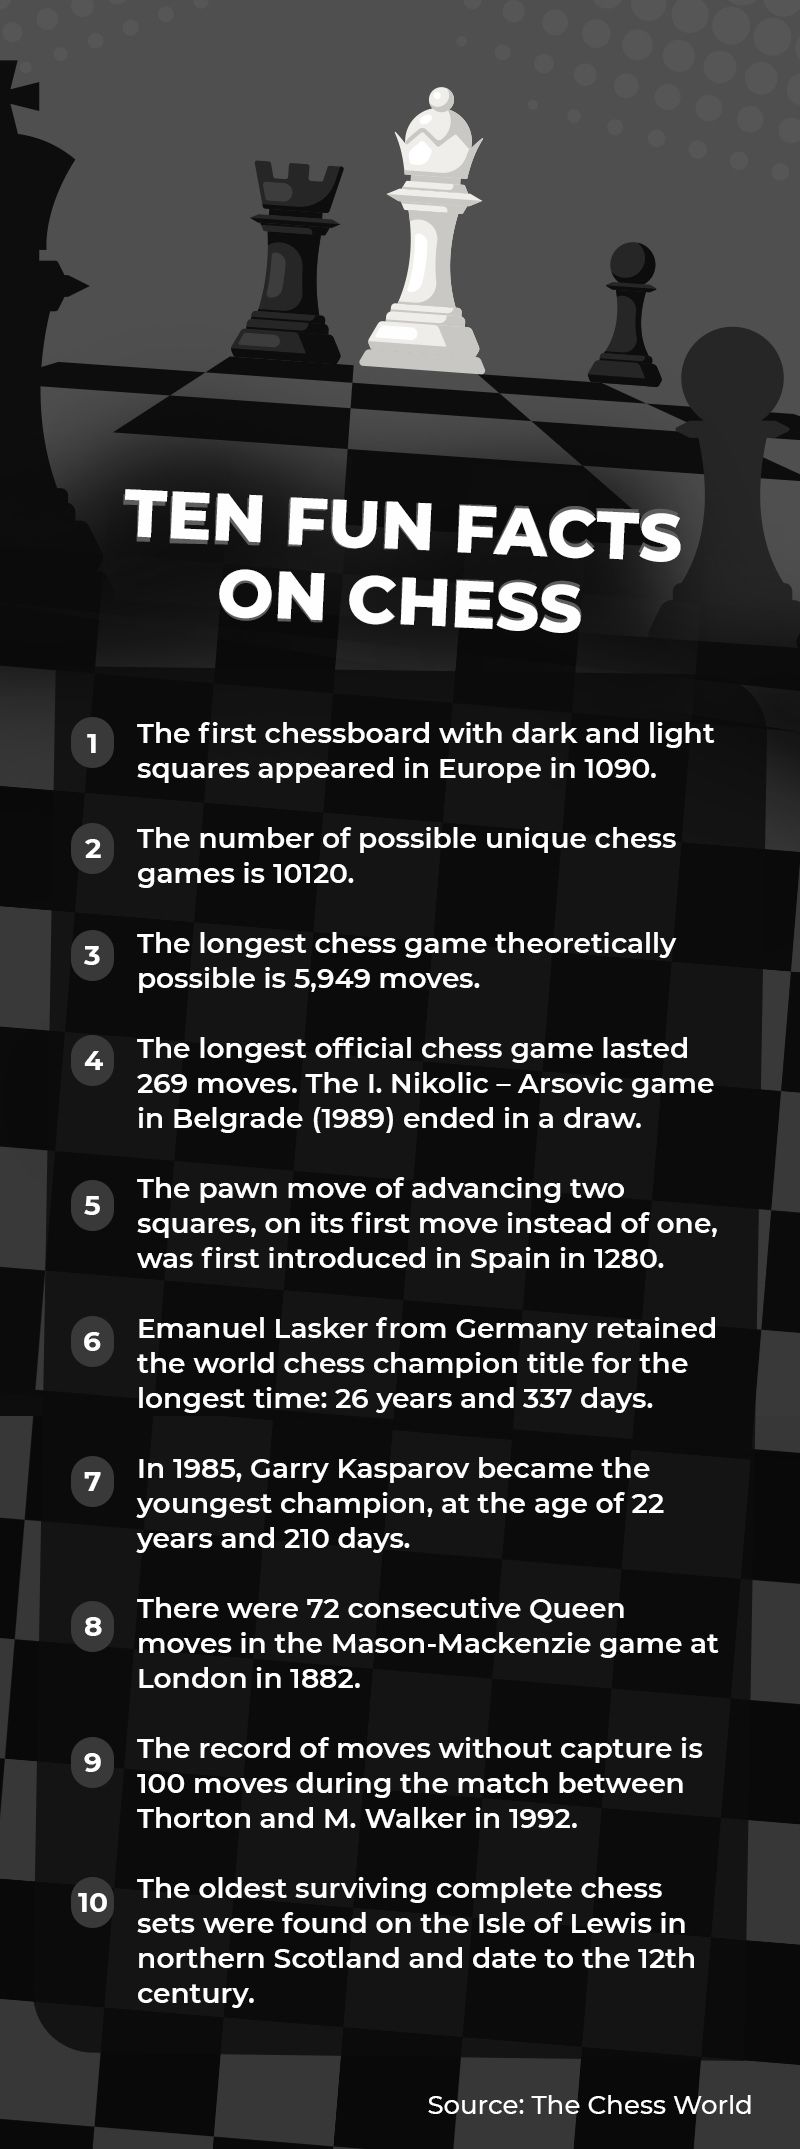 Does the longest chess game that is theoretically possible have